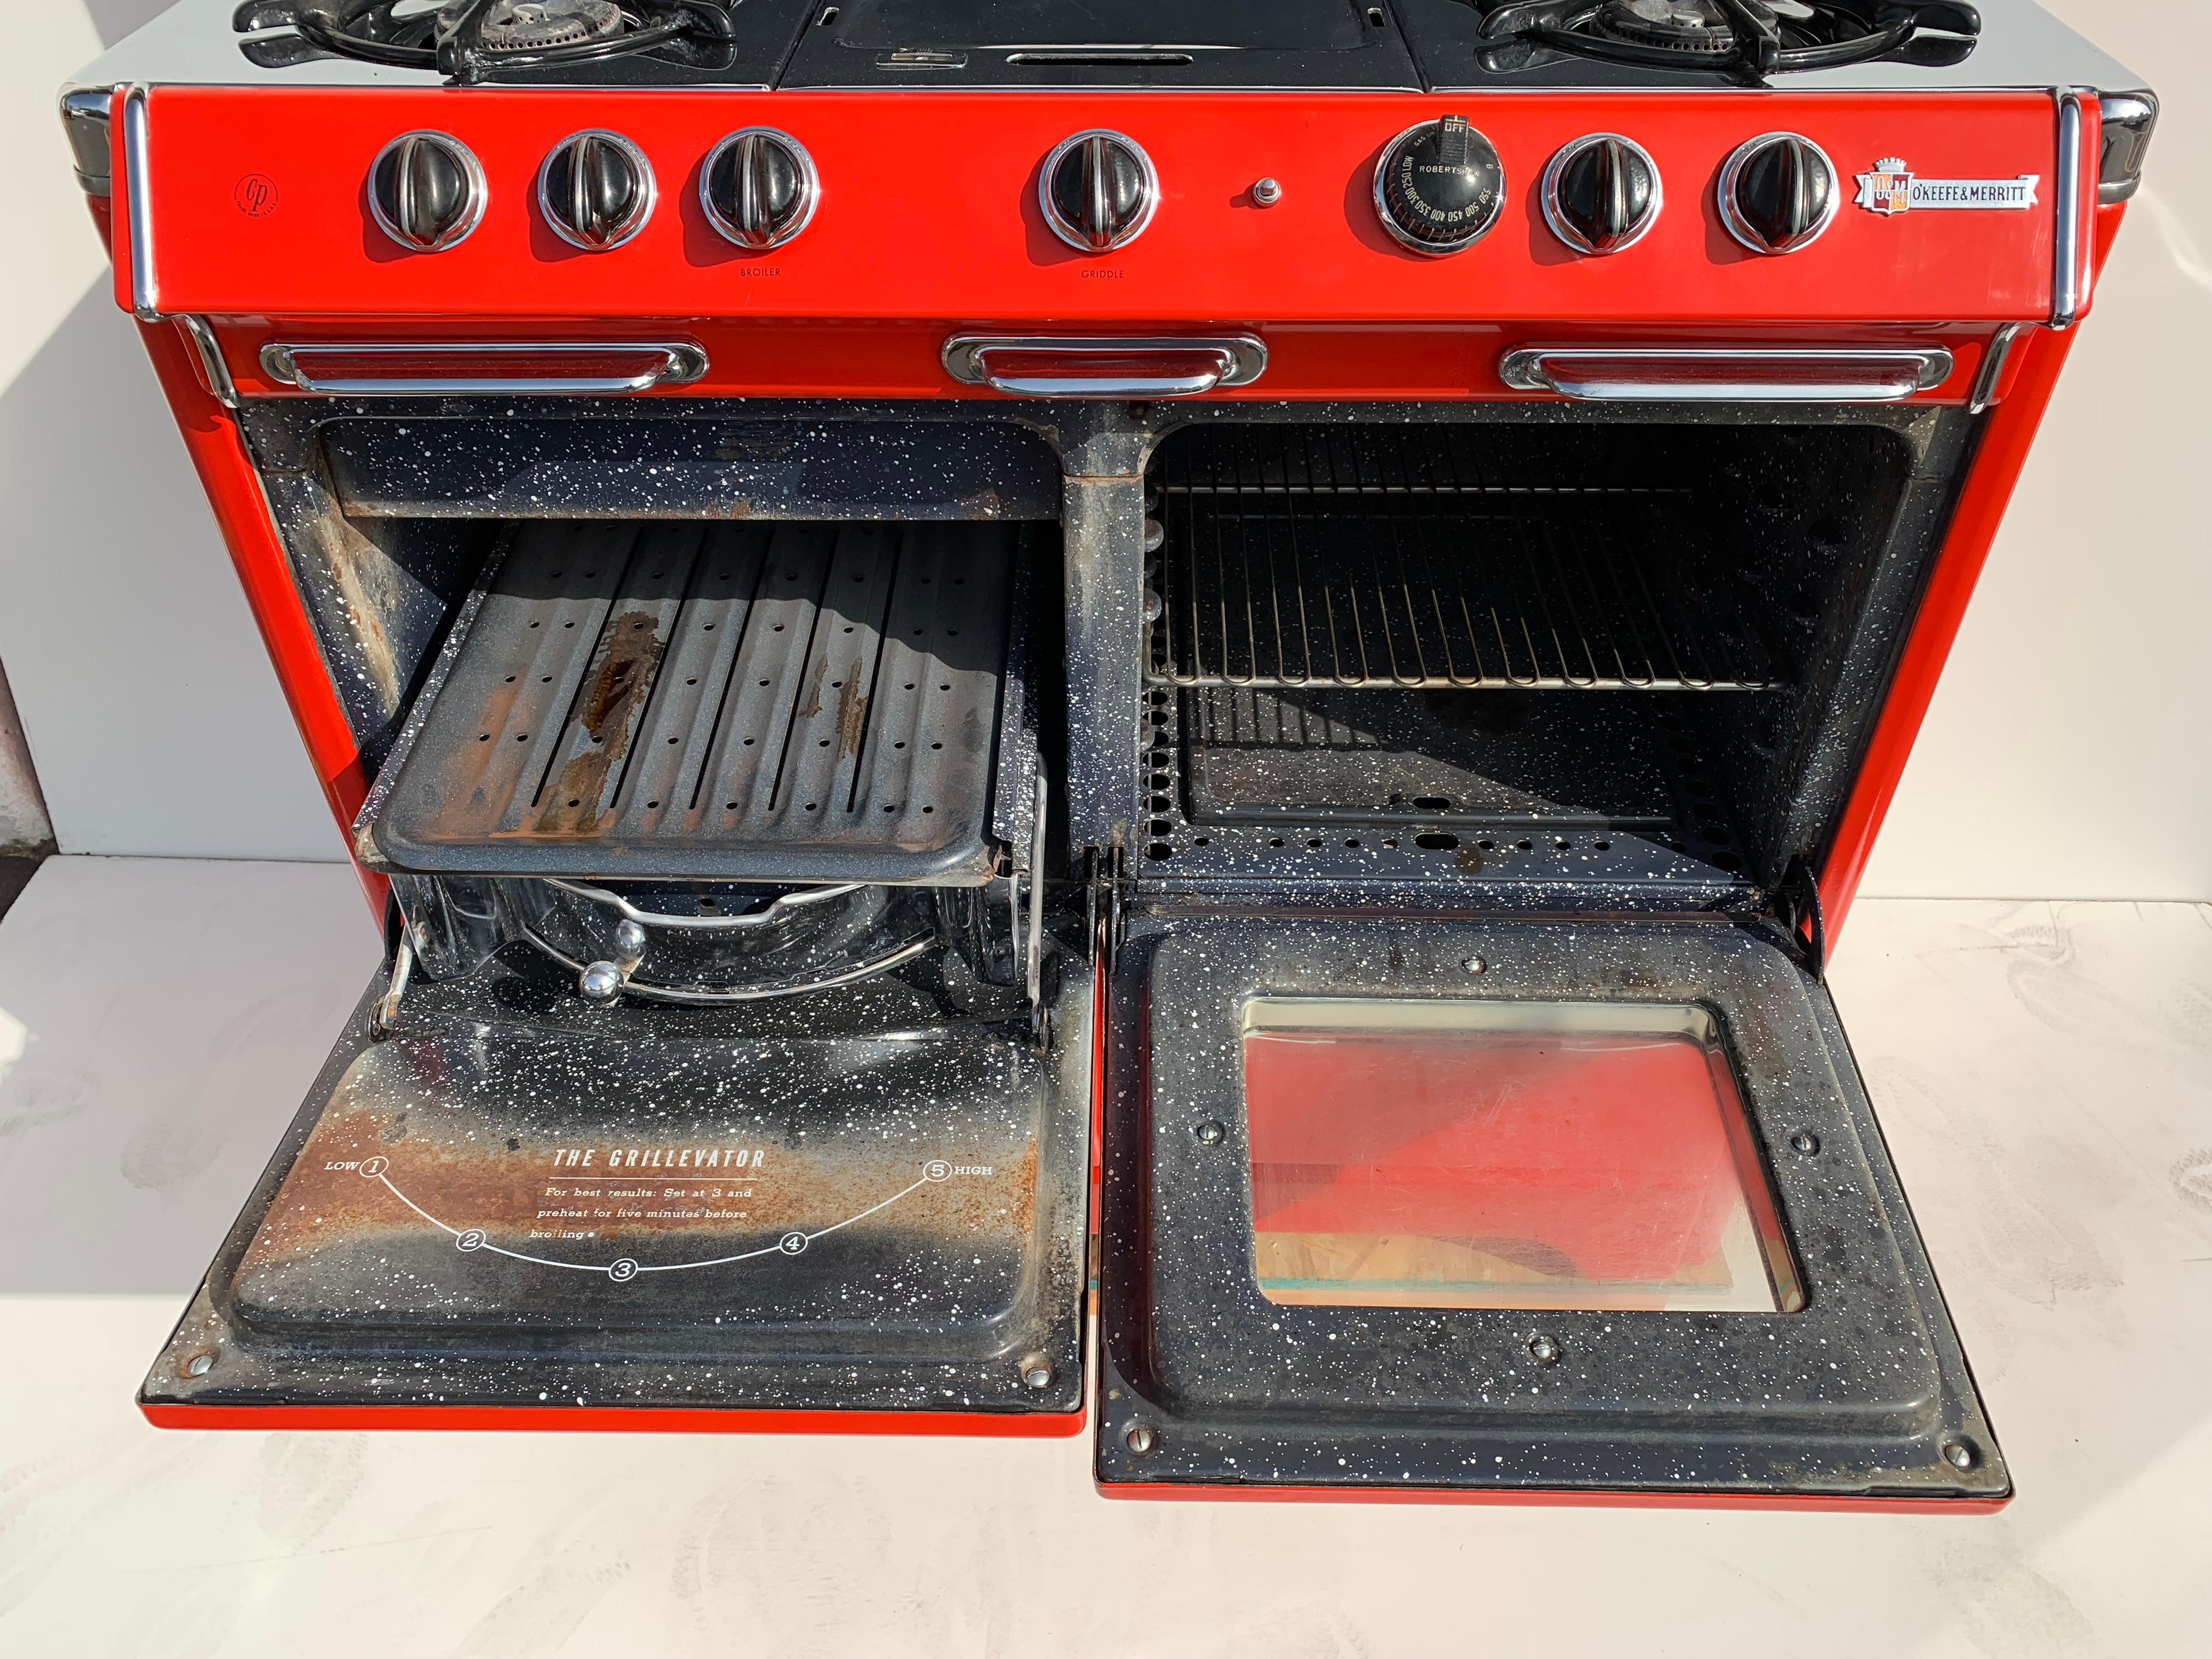 American Red O'Keefe & Merritt Stove, 1948 For Sale